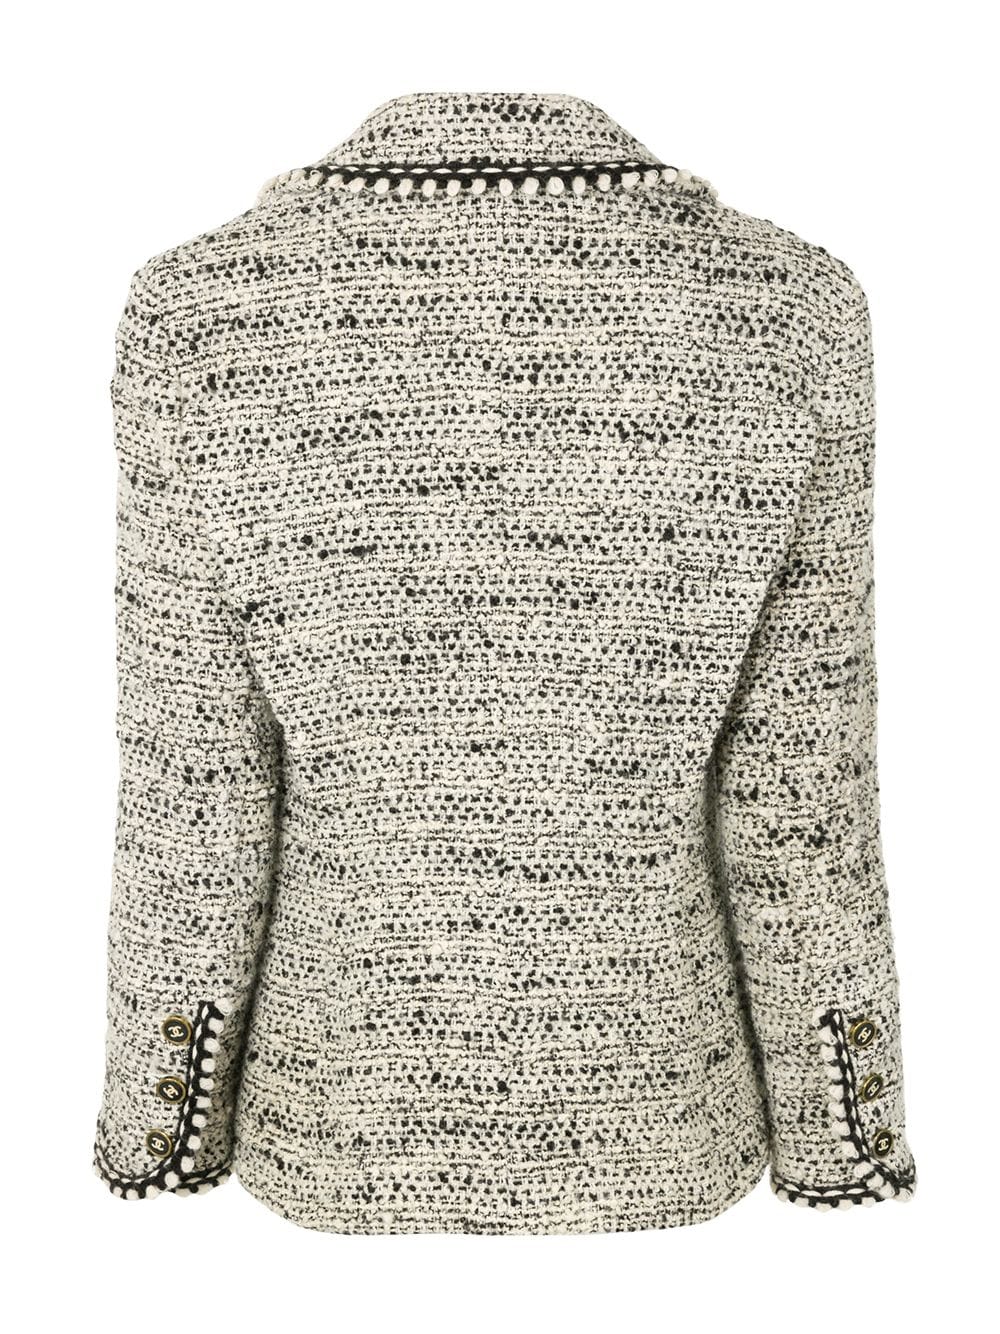 CHANEL Pre-Owned 1990s CC Button Tweed Jacket - Farfetch